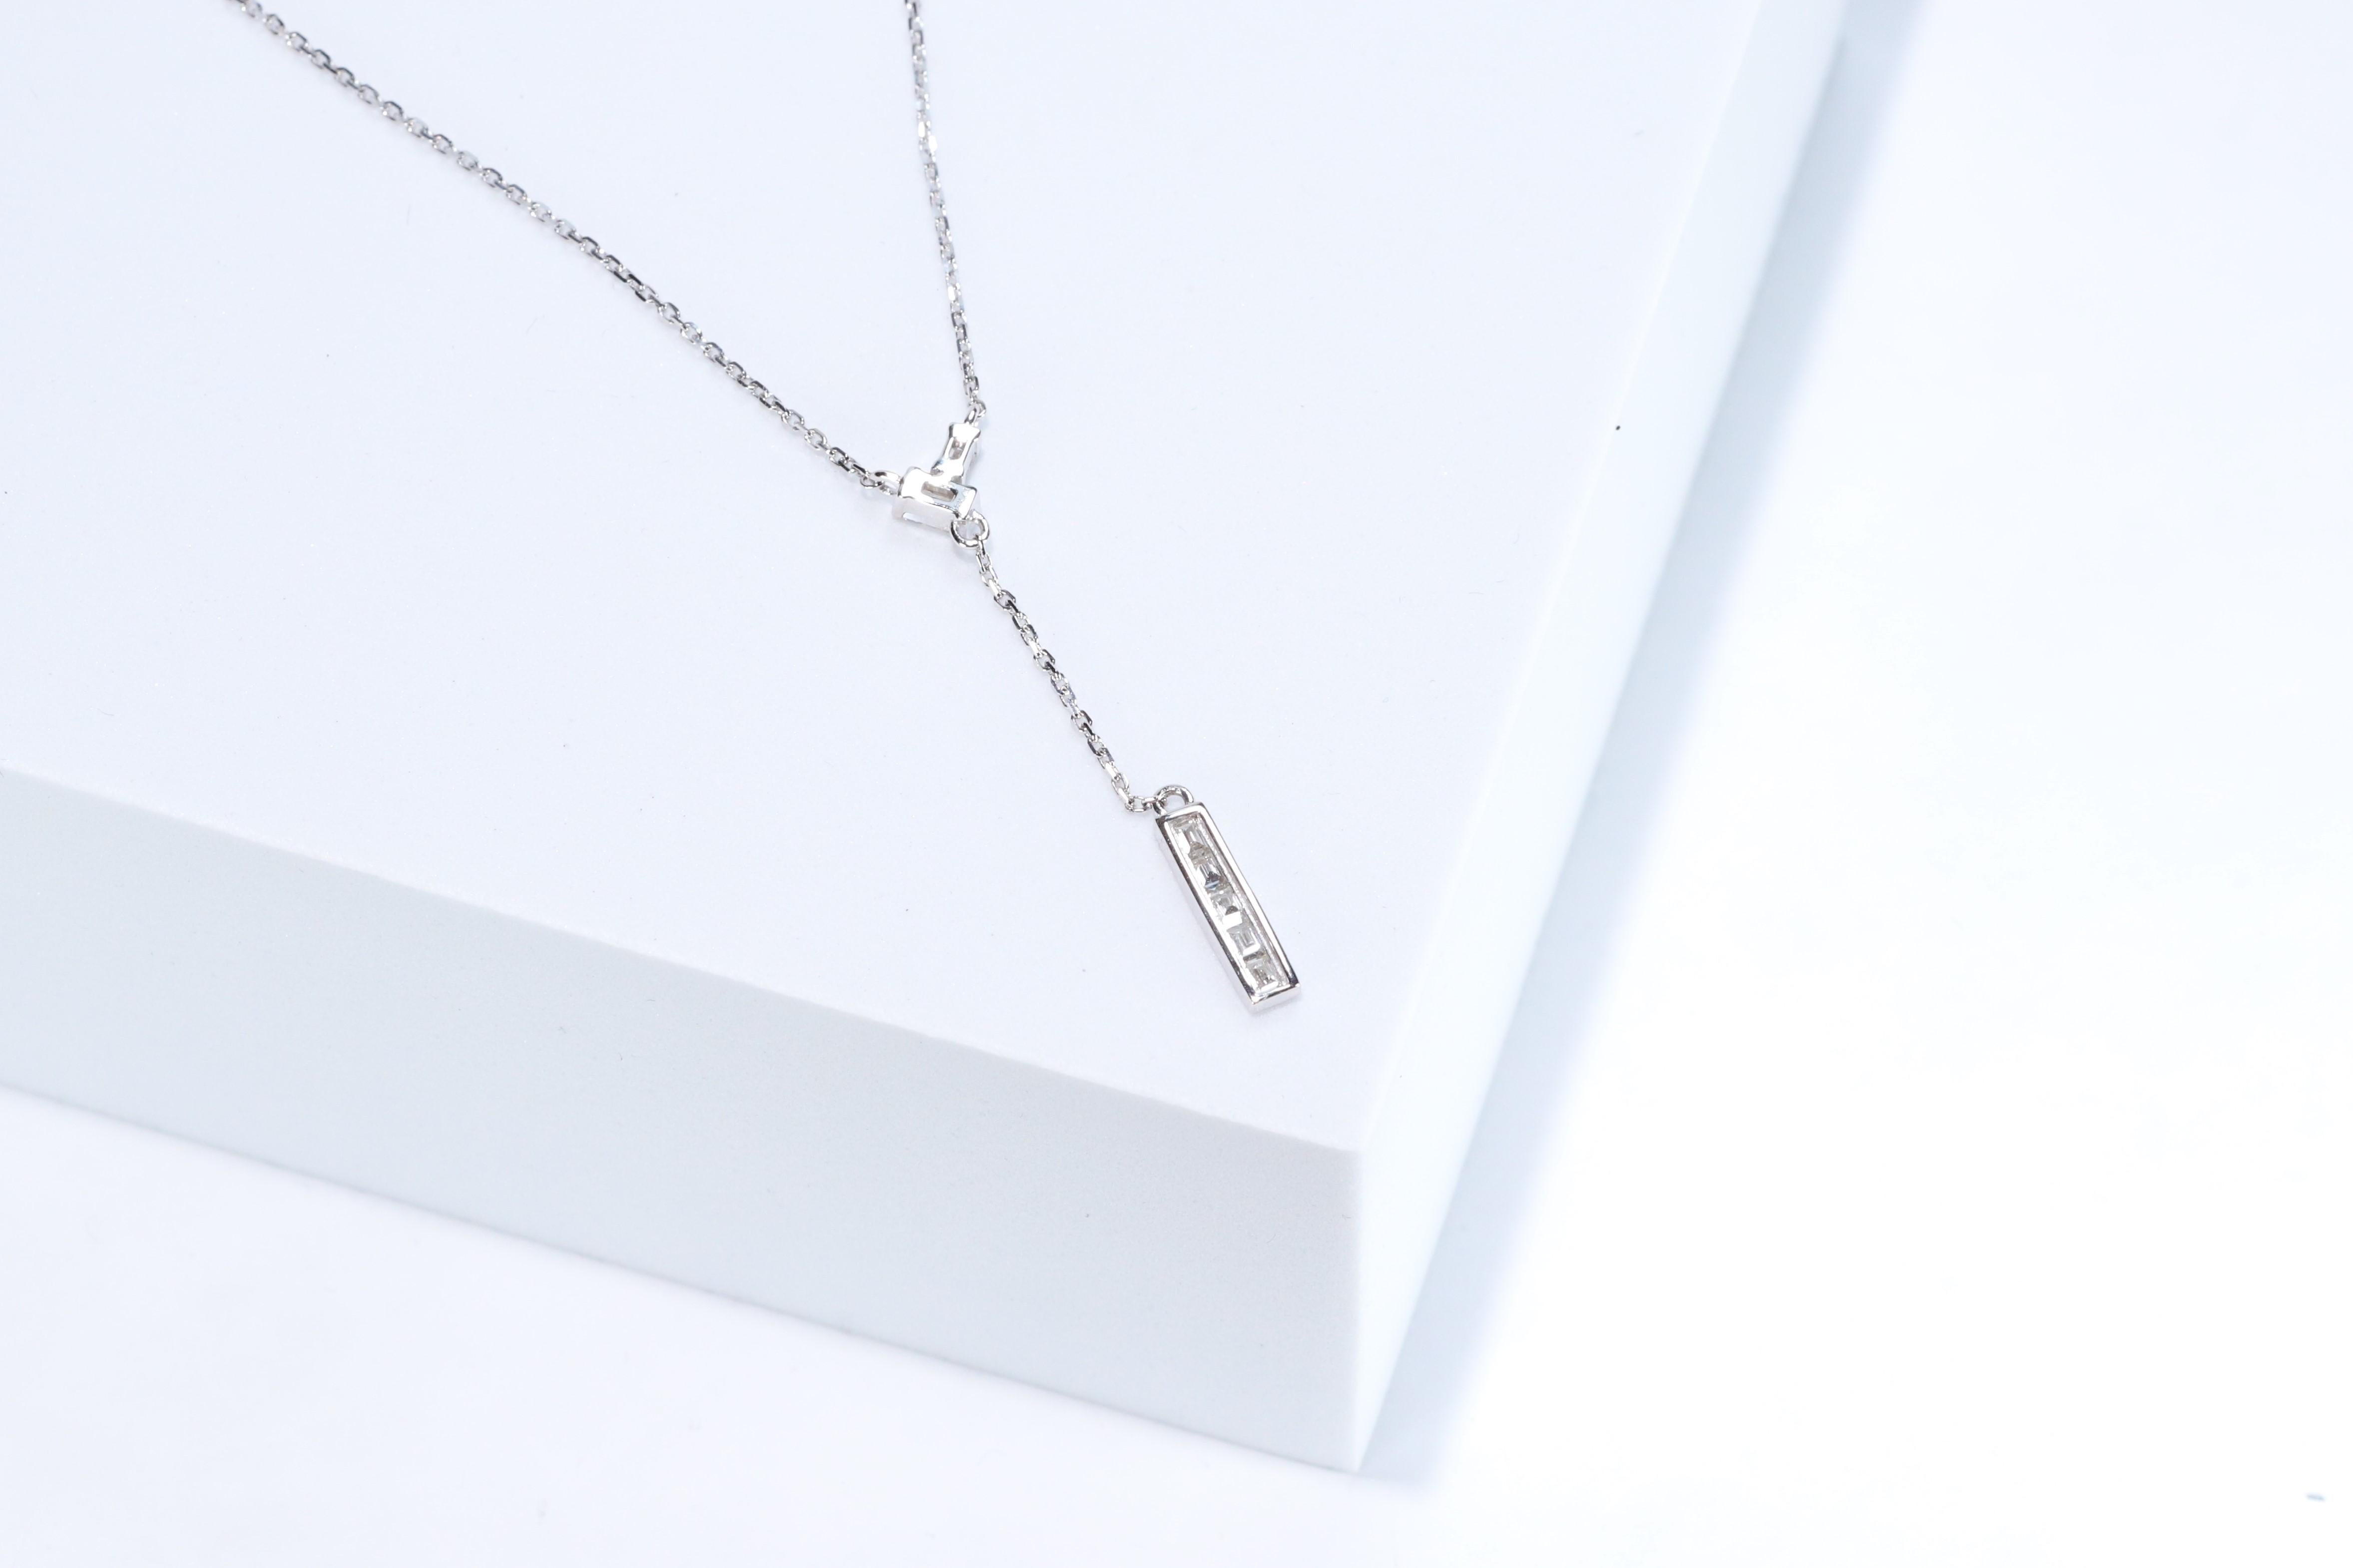 Stunning, timeless and classy eternity Unique Necklace. Decorate yourself in luxury with this Gin & Grace Necklace. The 14K White Gold jewelry boasts with Natural Baguette-cut white Diamond (7 Pcs) 0.34 Carat accent stones for a lovely design. This